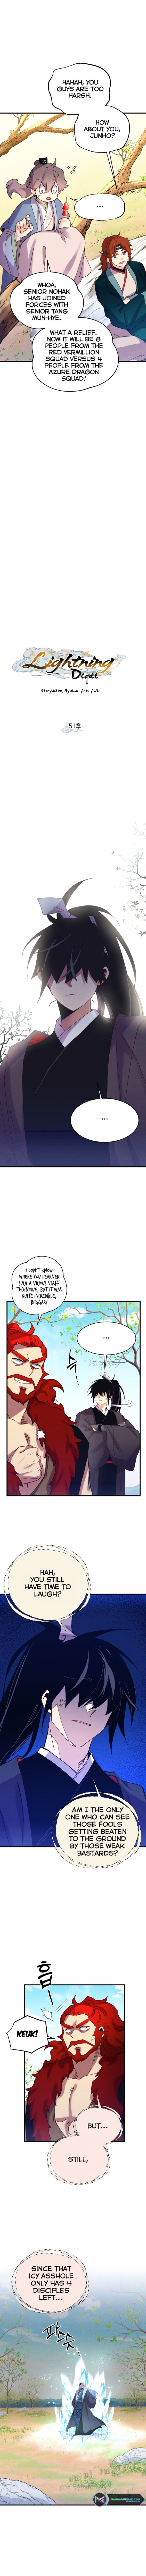 Lightning Degree - Chapter 151 Page 4